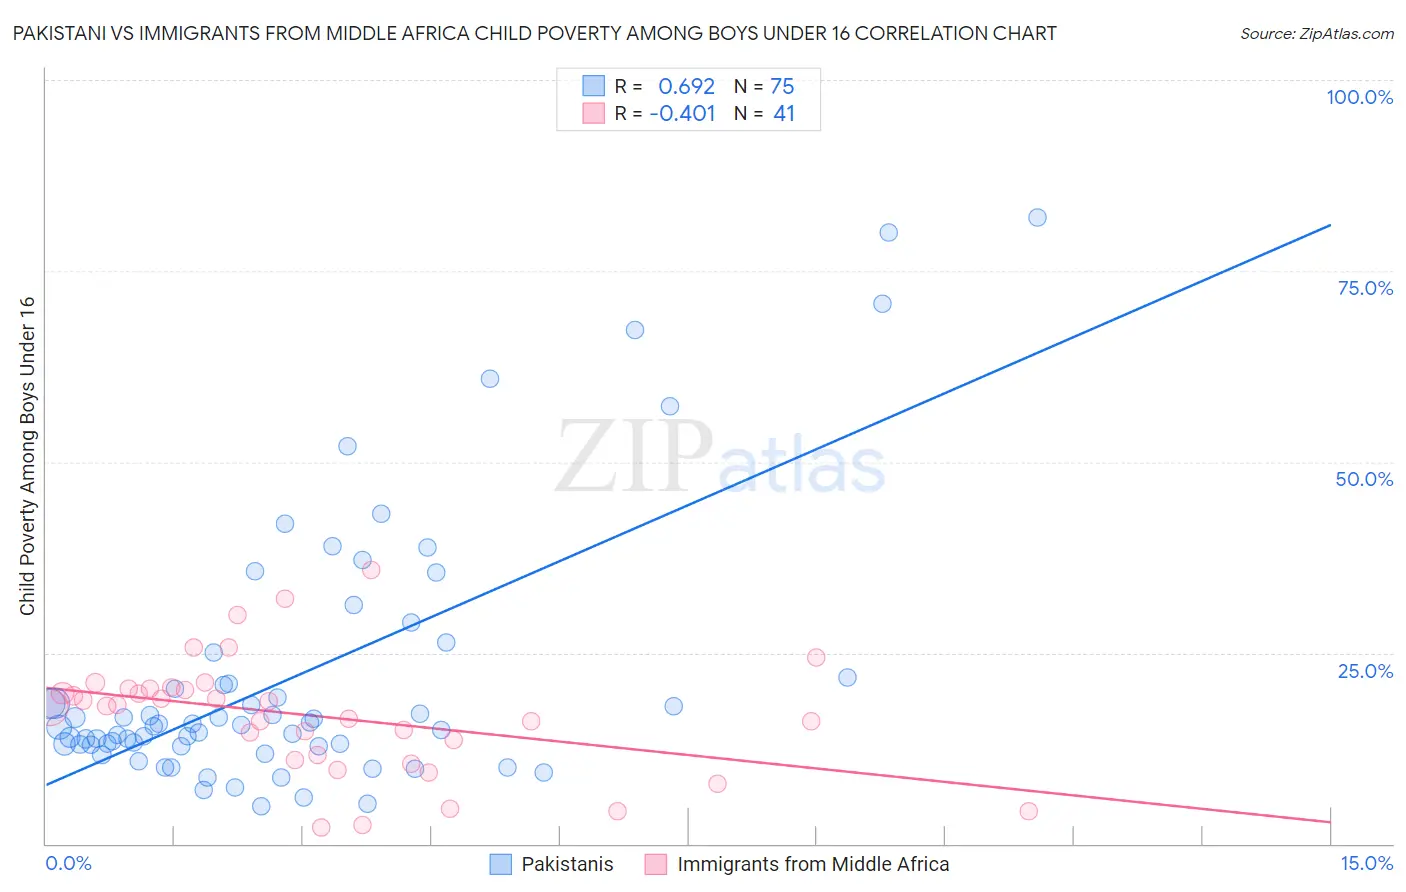 Pakistani vs Immigrants from Middle Africa Child Poverty Among Boys Under 16